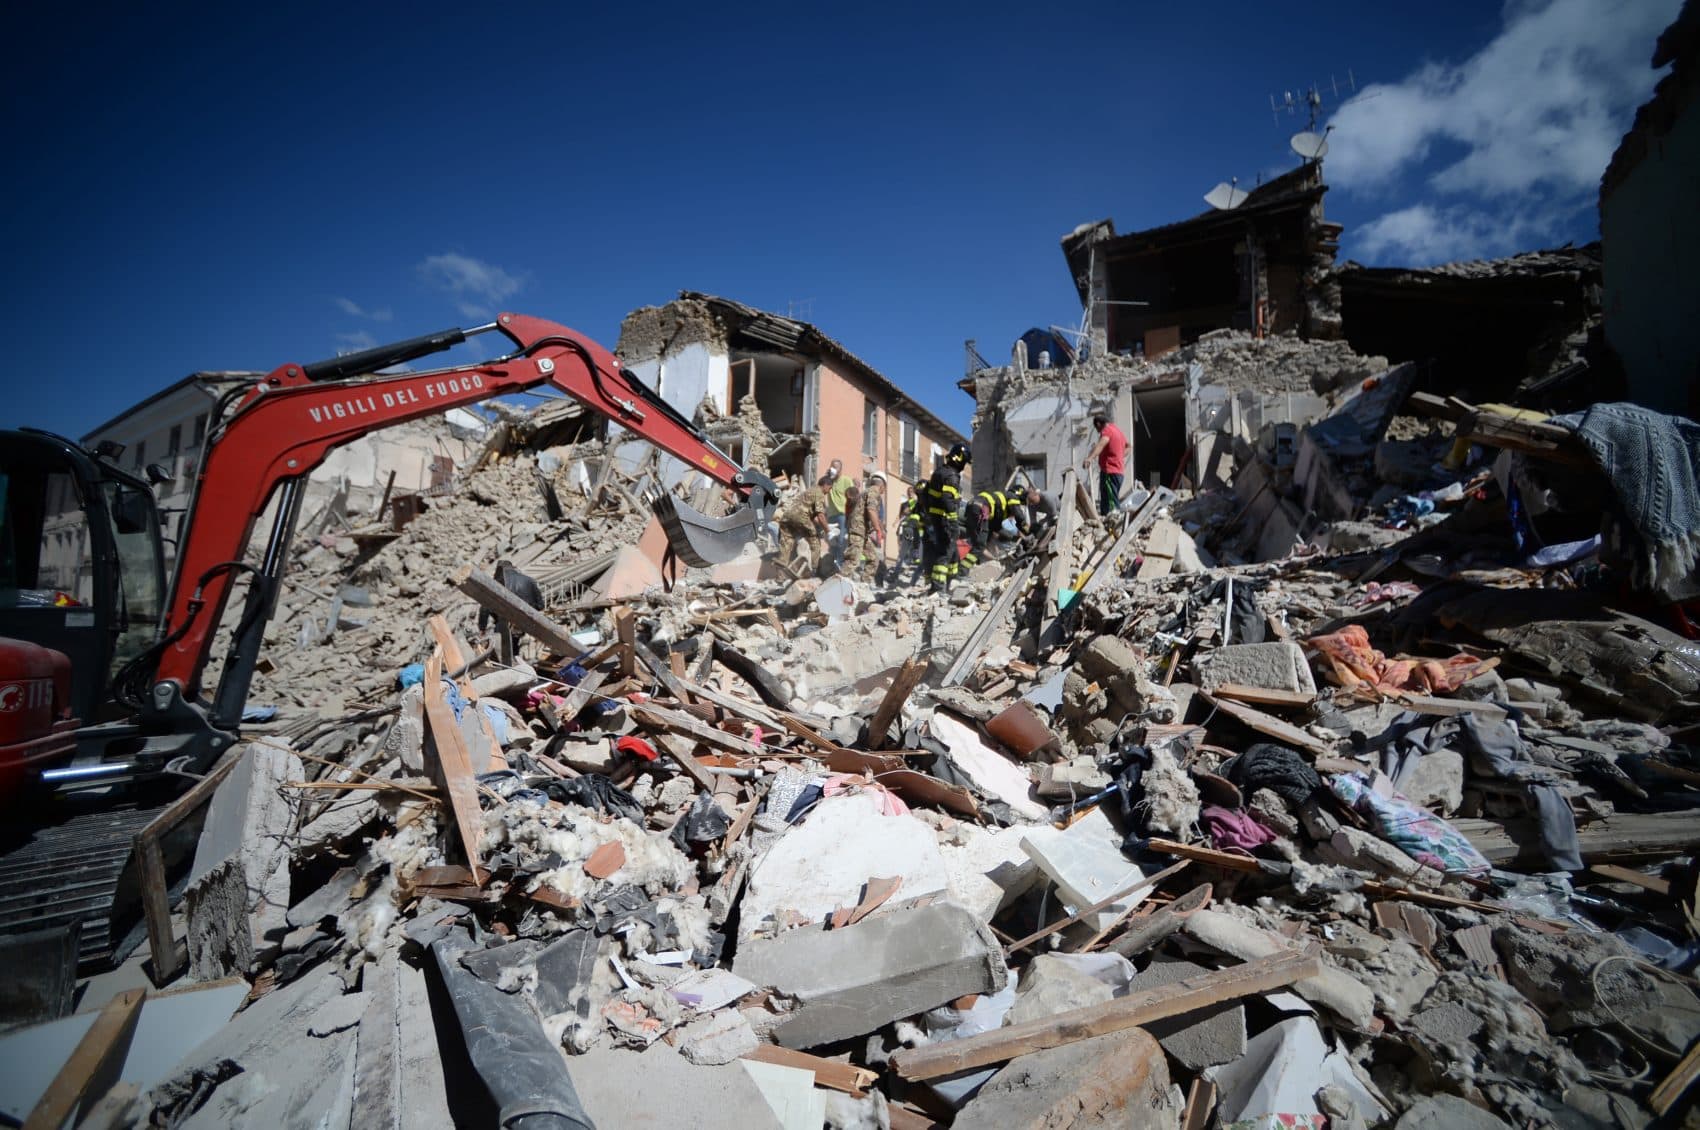 Rescuers and firemen inspect the rubble of buildings in Amatrice, Italy on Aug. 24, 2016 after a powerful earthquake rocked central Italy. (Filippo Monteforte/AFP/Getty Images)